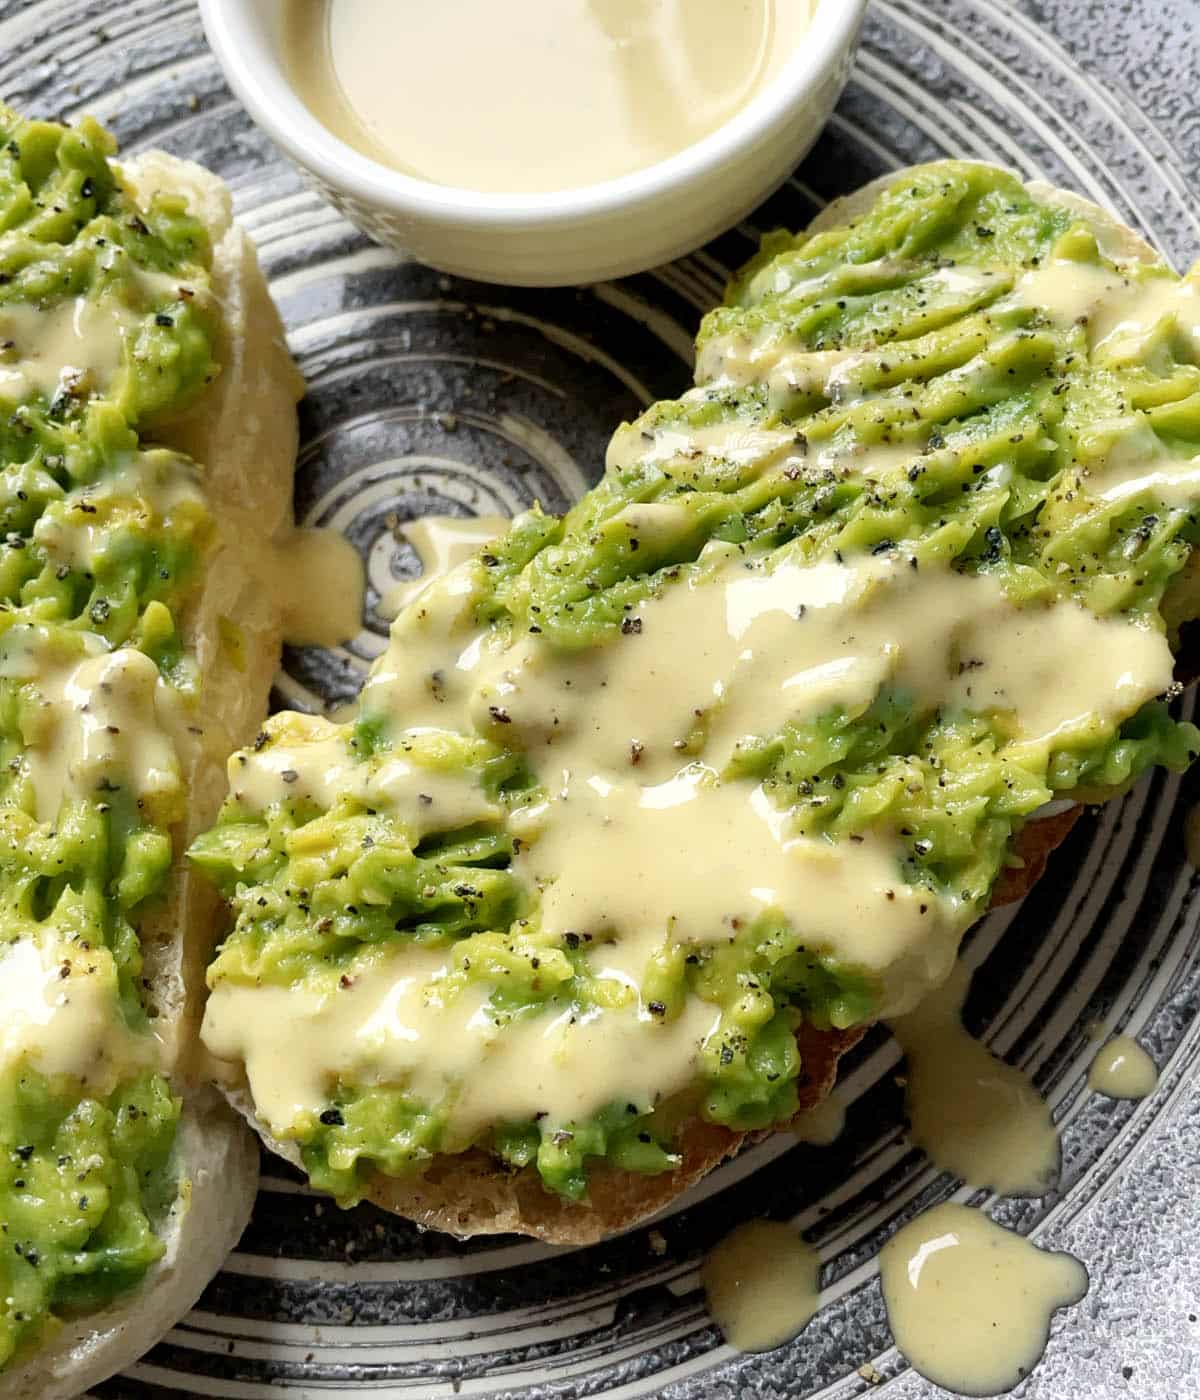 Two slices of toast topped with green mashed avocado and yellow honey mustard dressing.